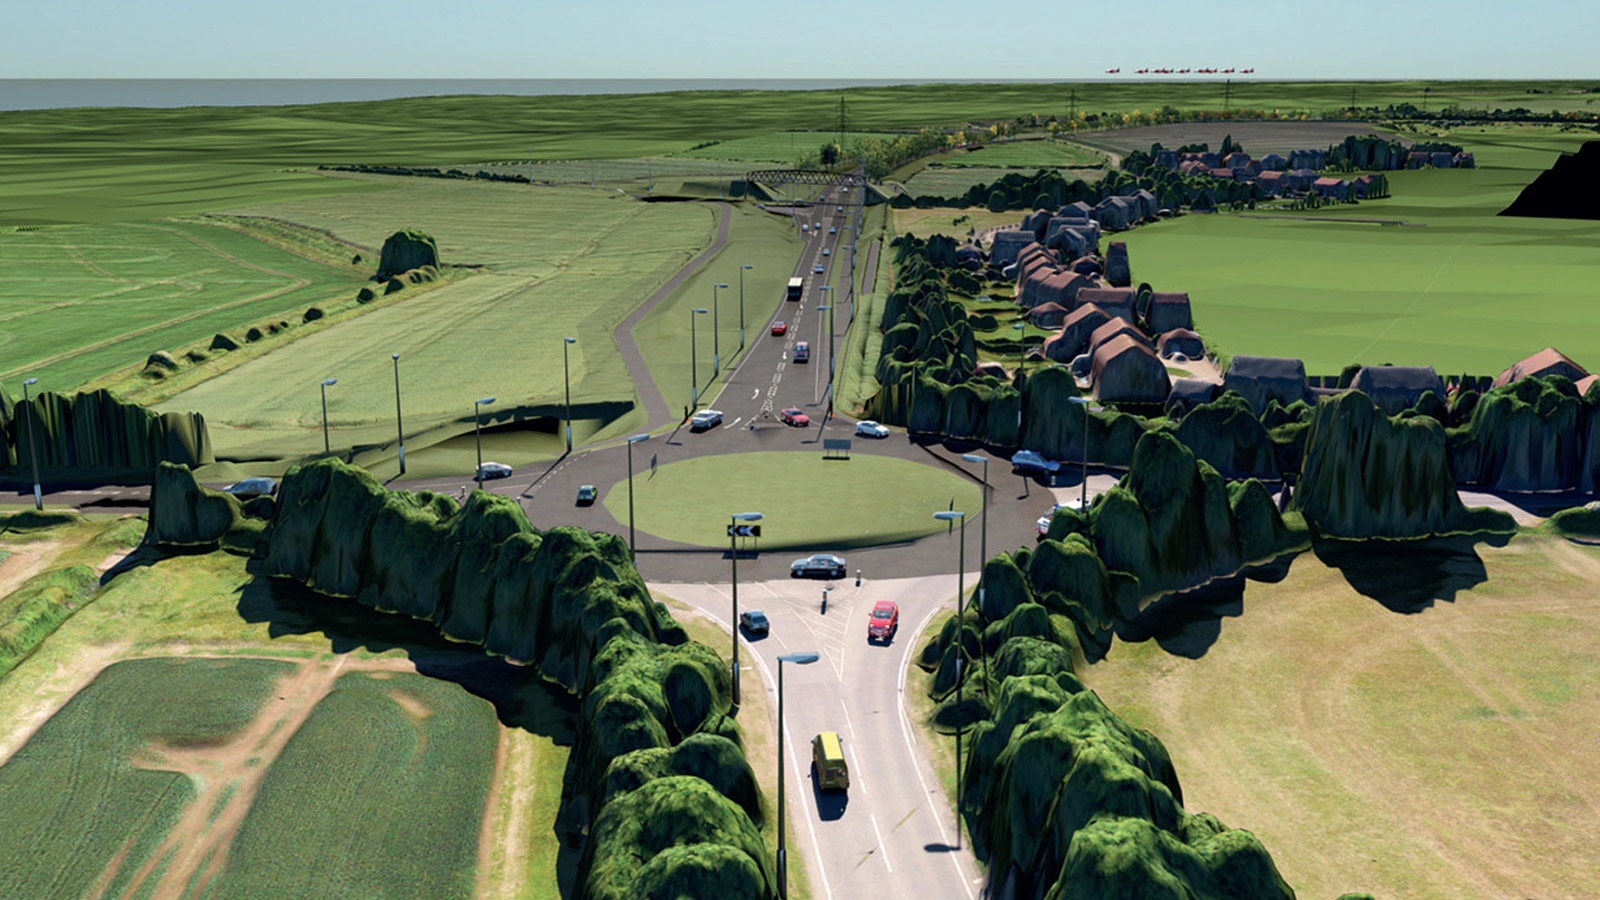 Lincoln Easter Bypass Plan.
Courtesy: Promote Lincolnshire